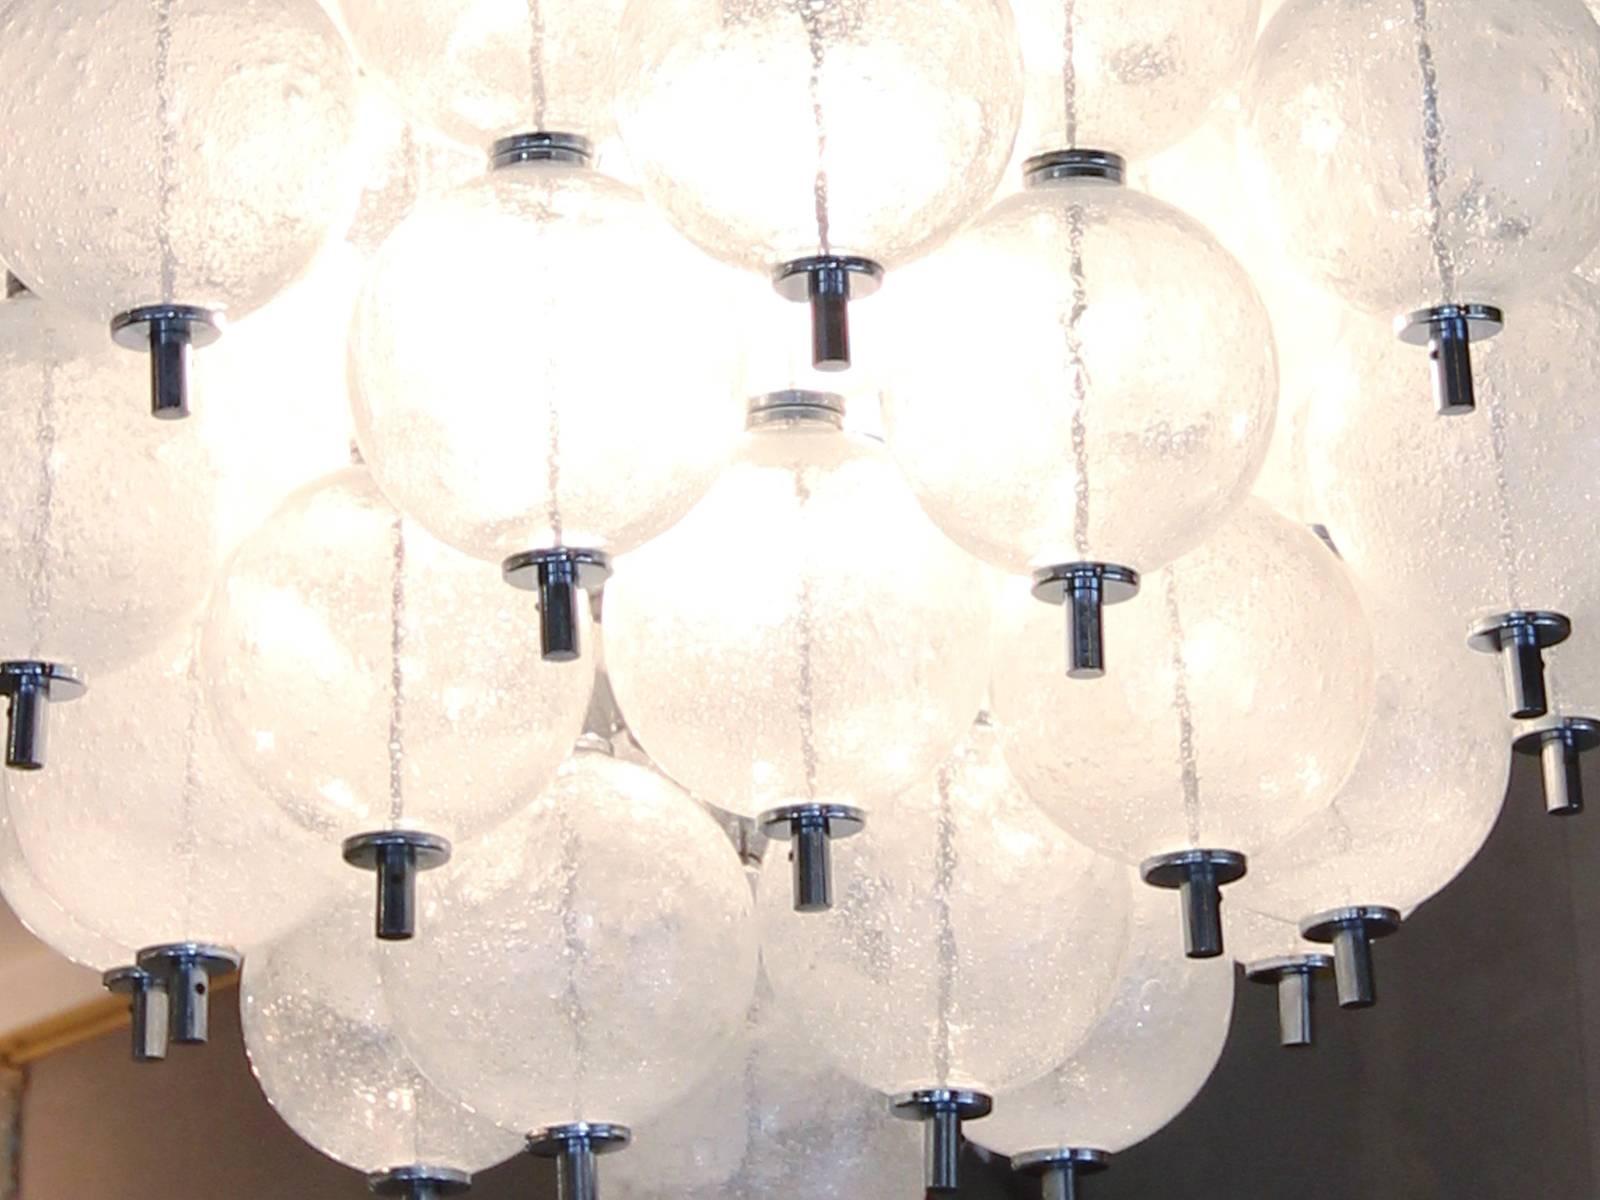 Rare ceiling light by  Zero Quattro in Milano, Italy, 1980.
Many spheres in Murano (probably made by Mazzega) bubble glass are suspended using chains to a ceiling in chrome metal. Three-light bulbs are hidden in the middle of the chandelier.
